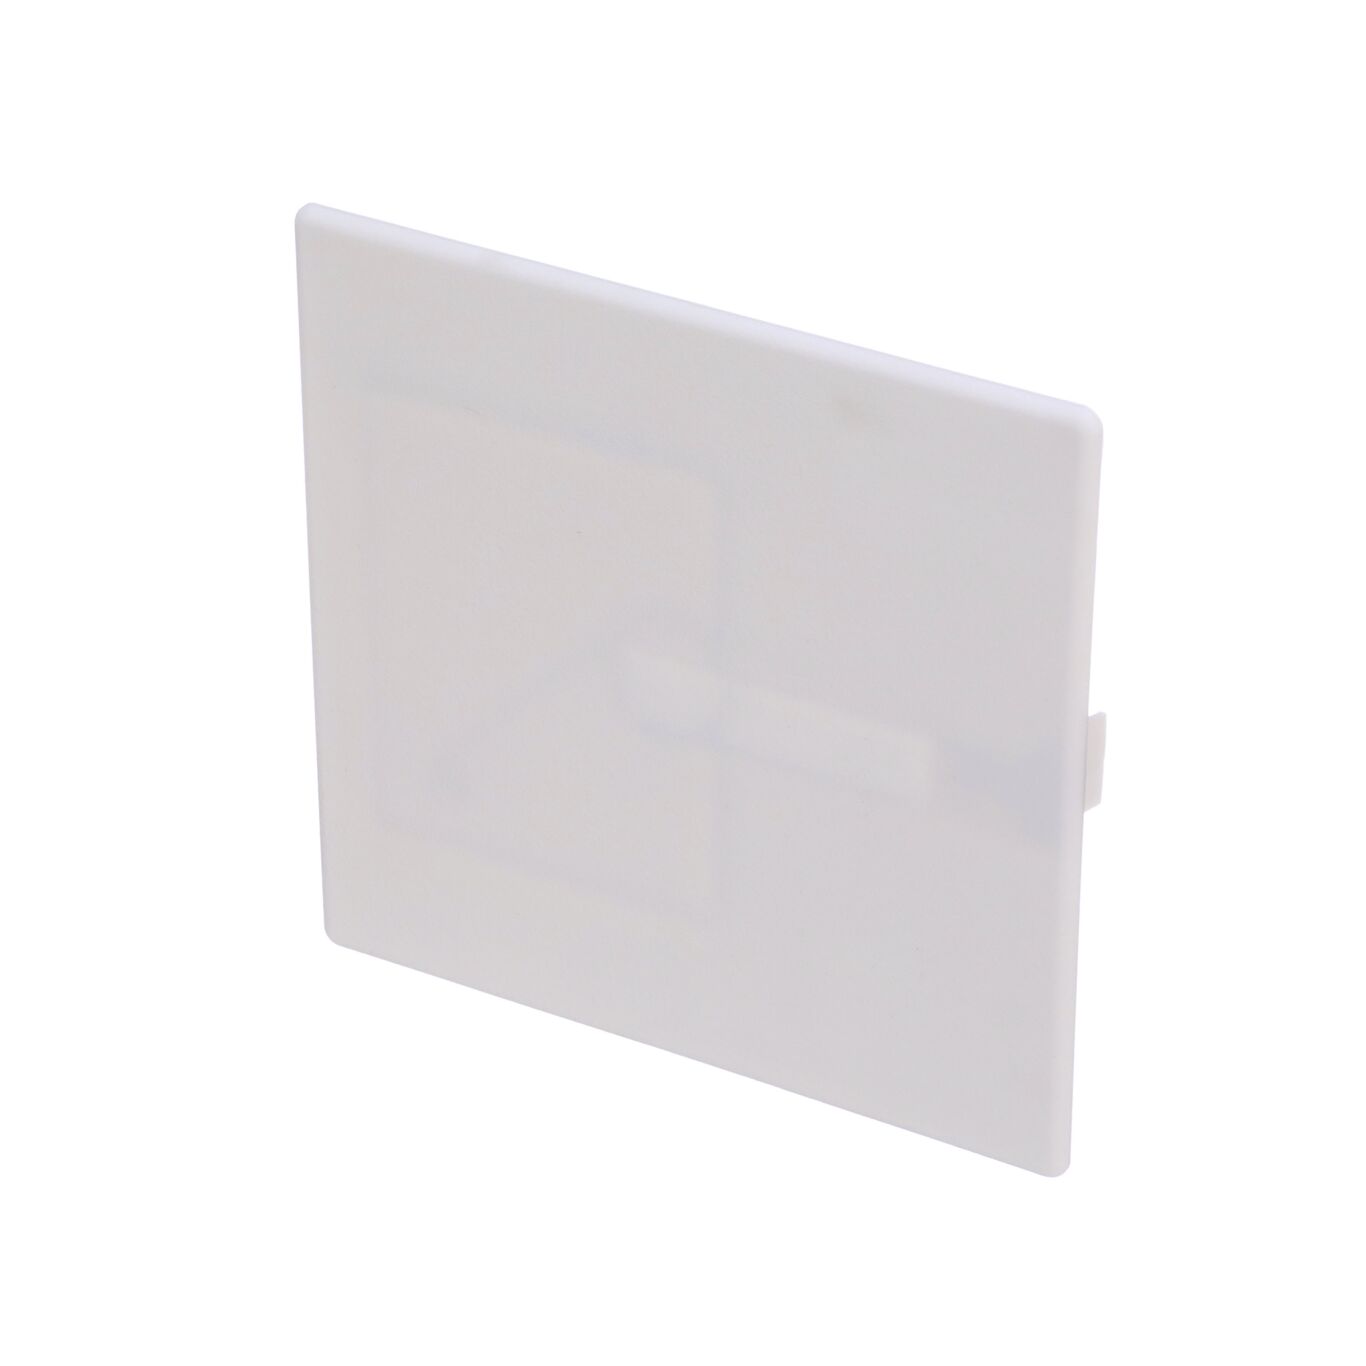 8 X 8 In SpringFit Access Panel, Polystyrene